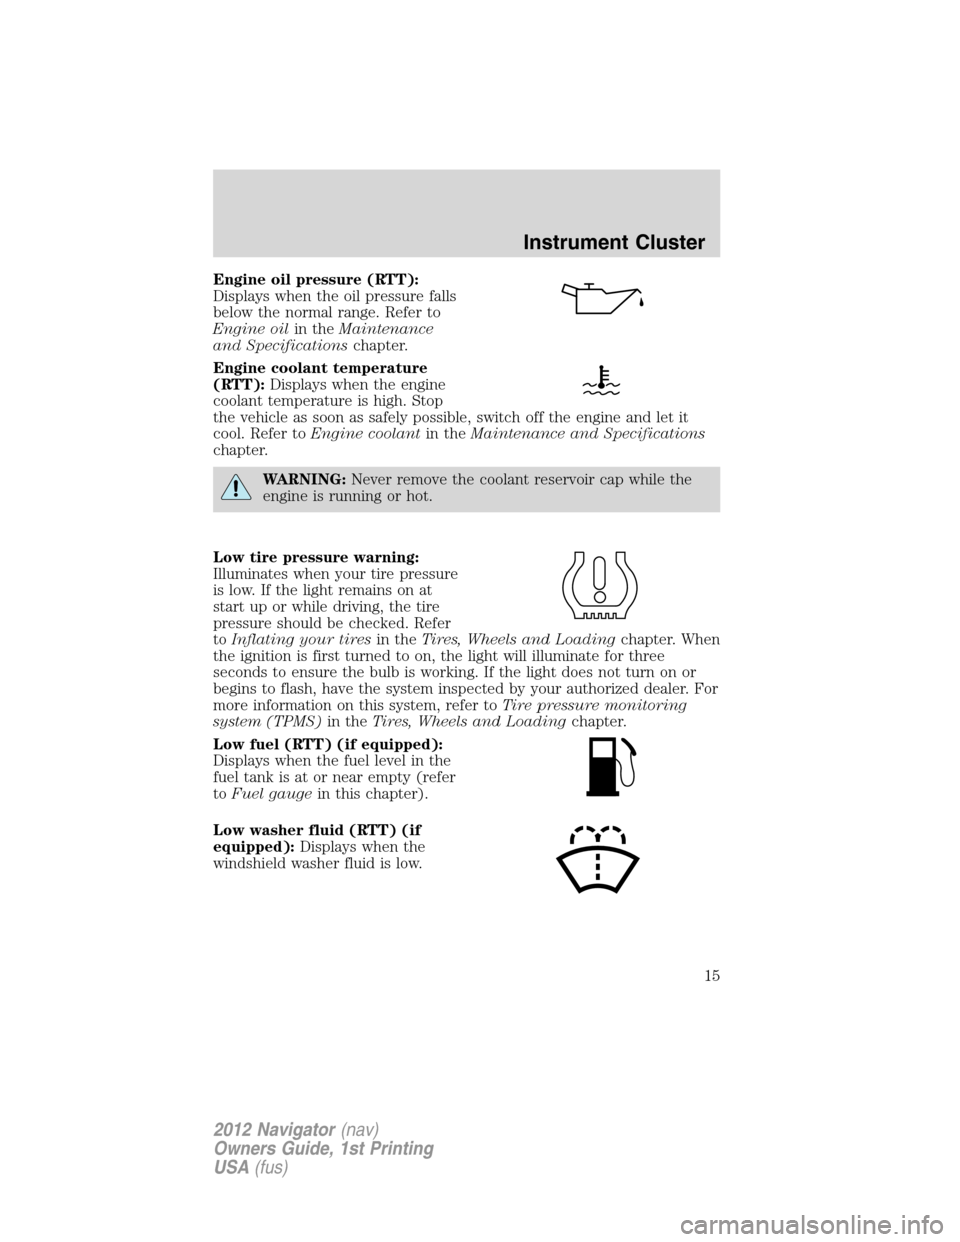 LINCOLN NAVIGATOR 2012  Navigation Manual Engine oil pressure (RTT):
Displays when the oil pressure falls
below the normal range. Refer to
Engine oilin theMaintenance
and Specificationschapter.
Engine coolant temperature
(RTT):Displays when t